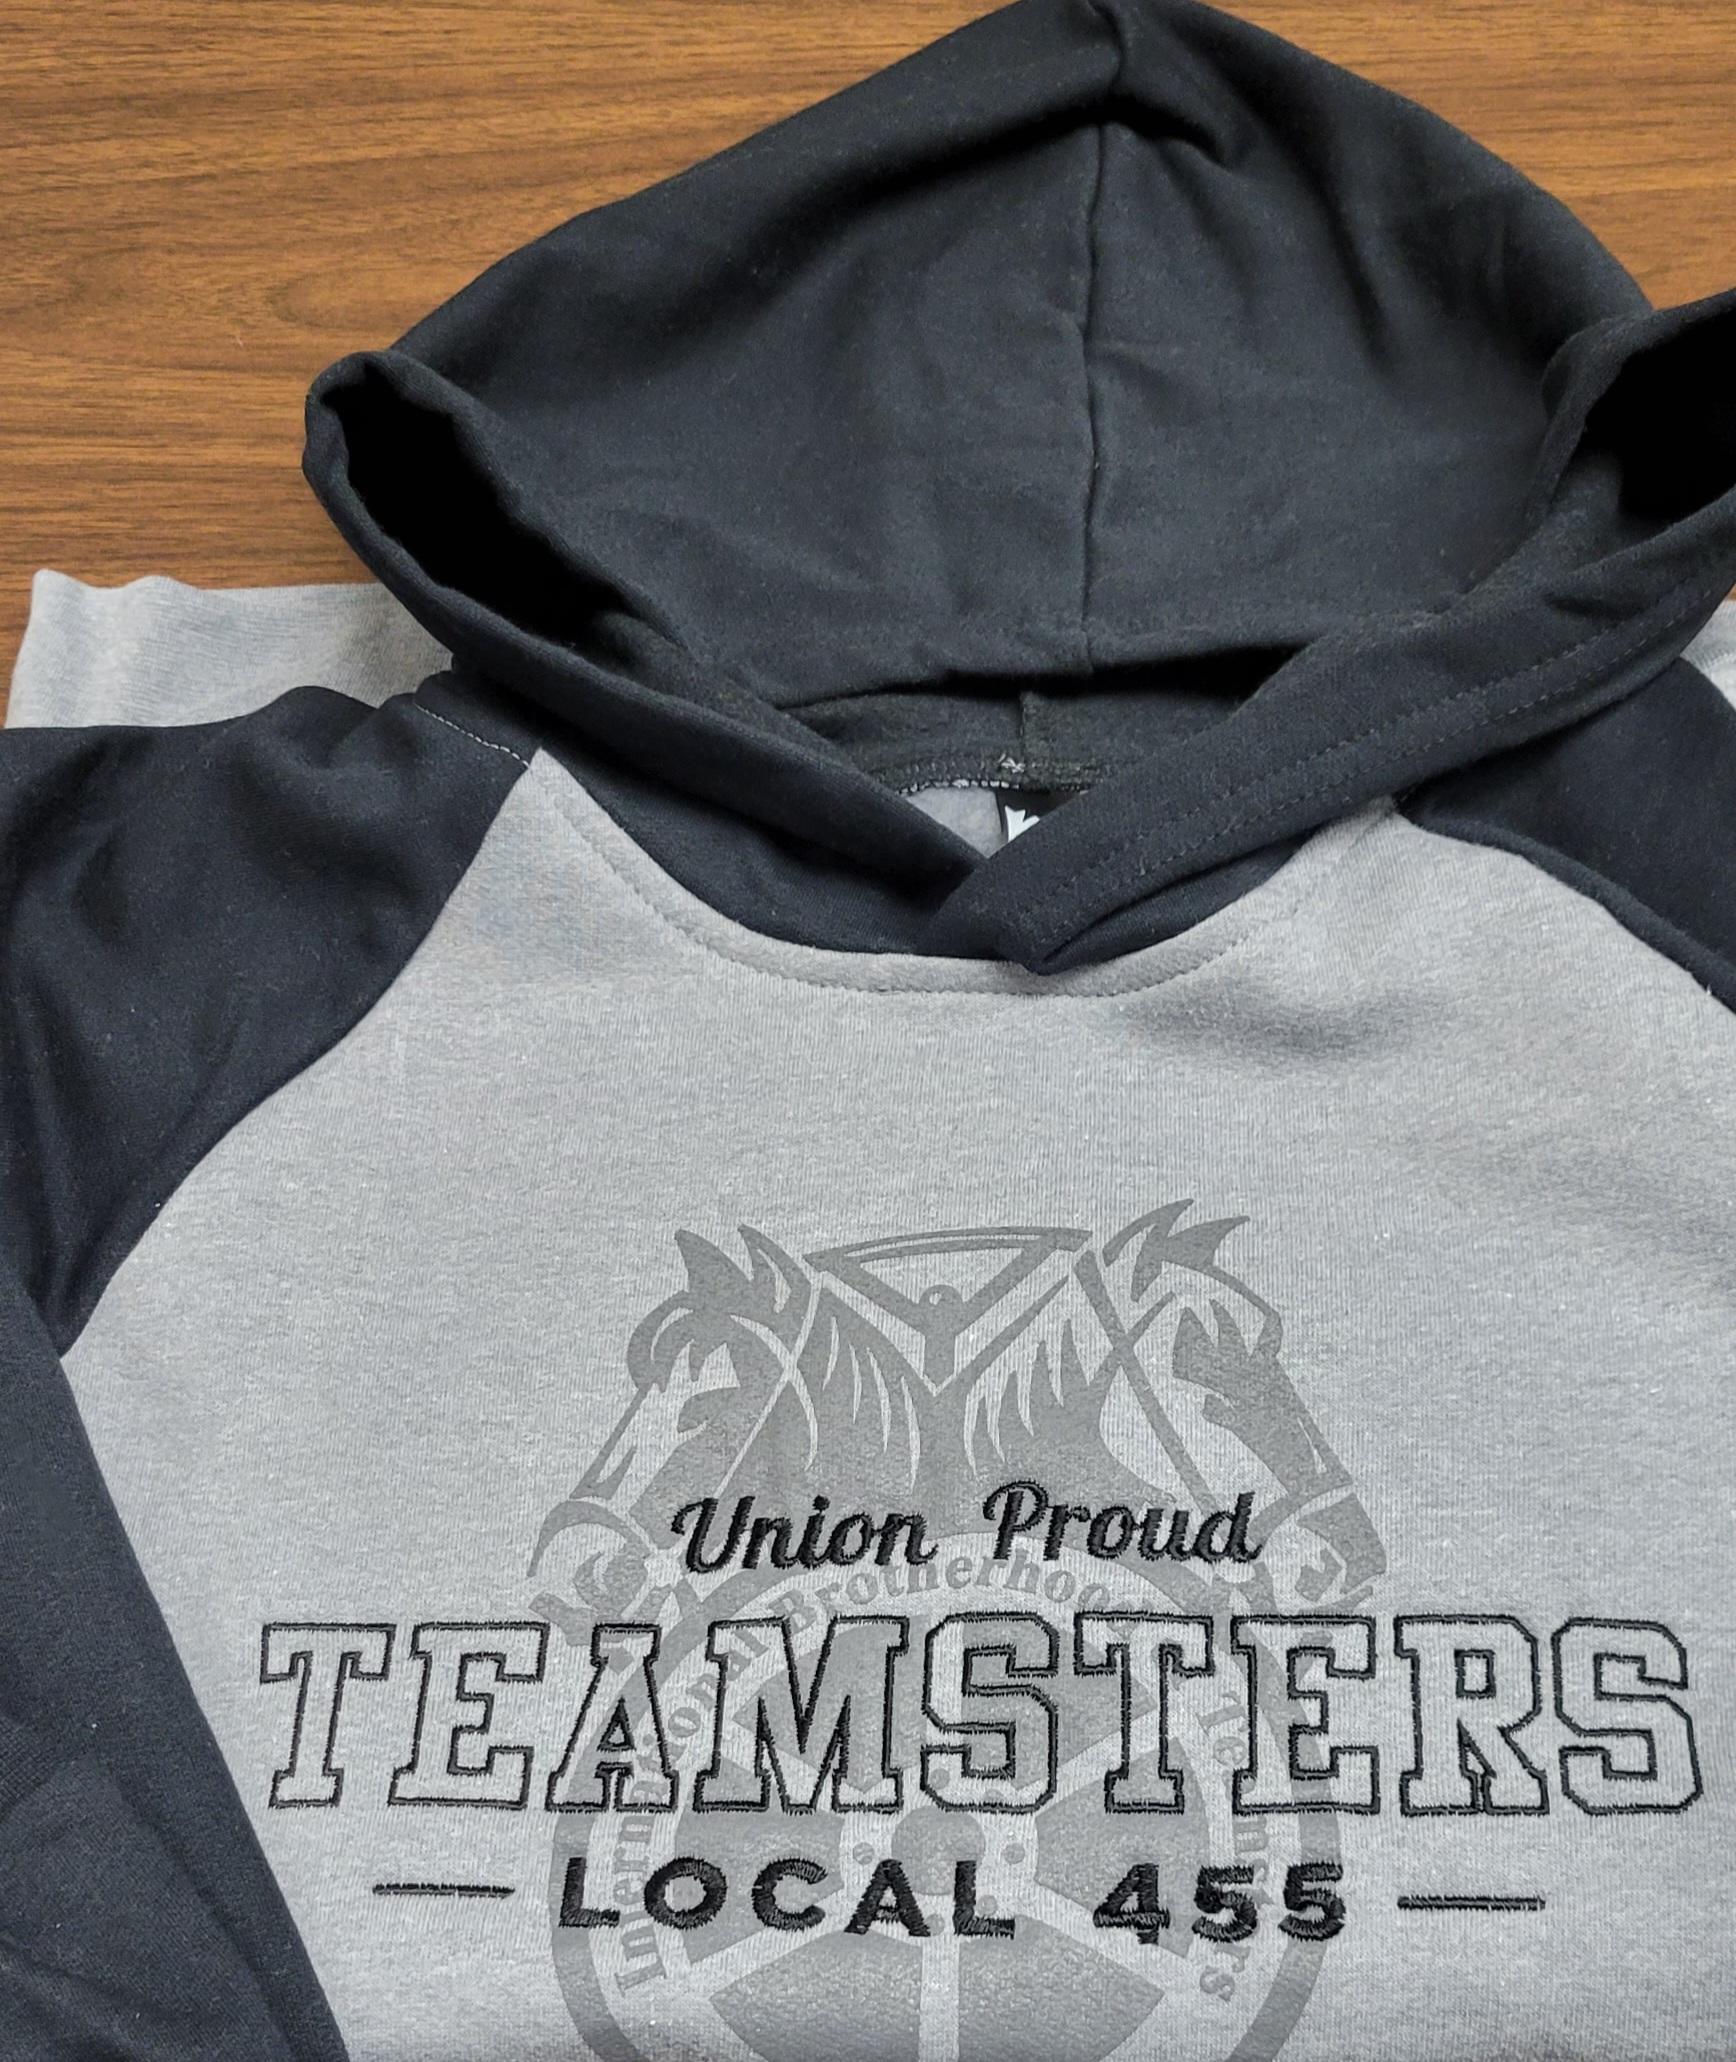 Teamsters Local 455 Online Store